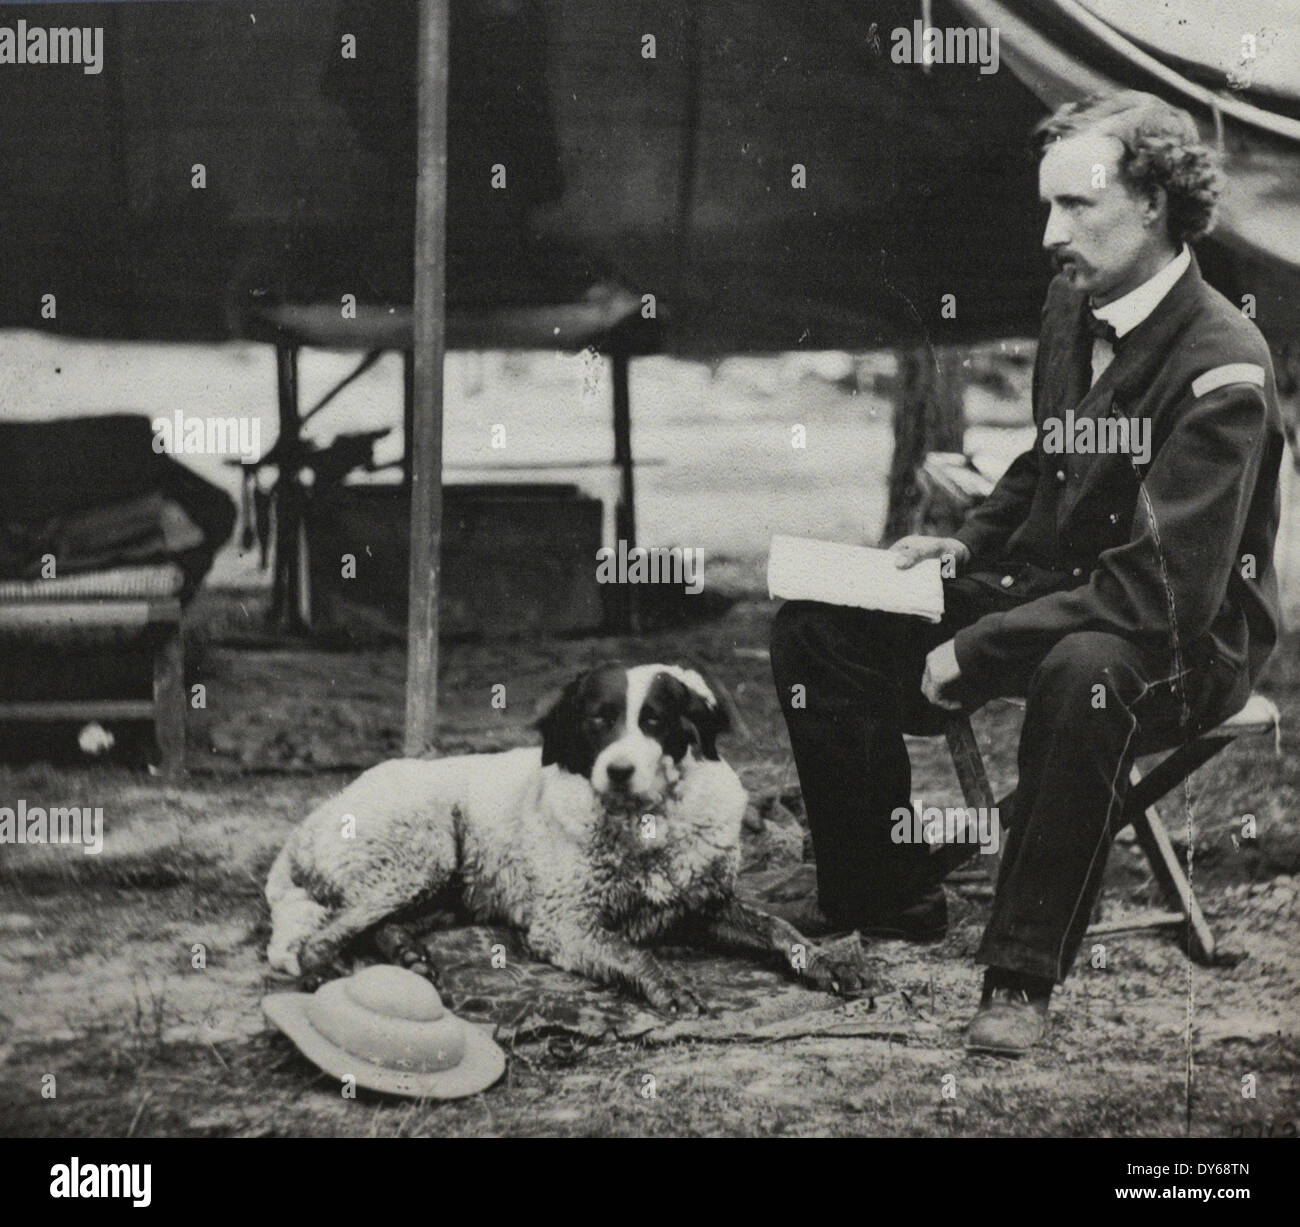 General George Armstrong Custer with a dog during the Peninsula Campaign of 1862, USA Civil War Stock Photo